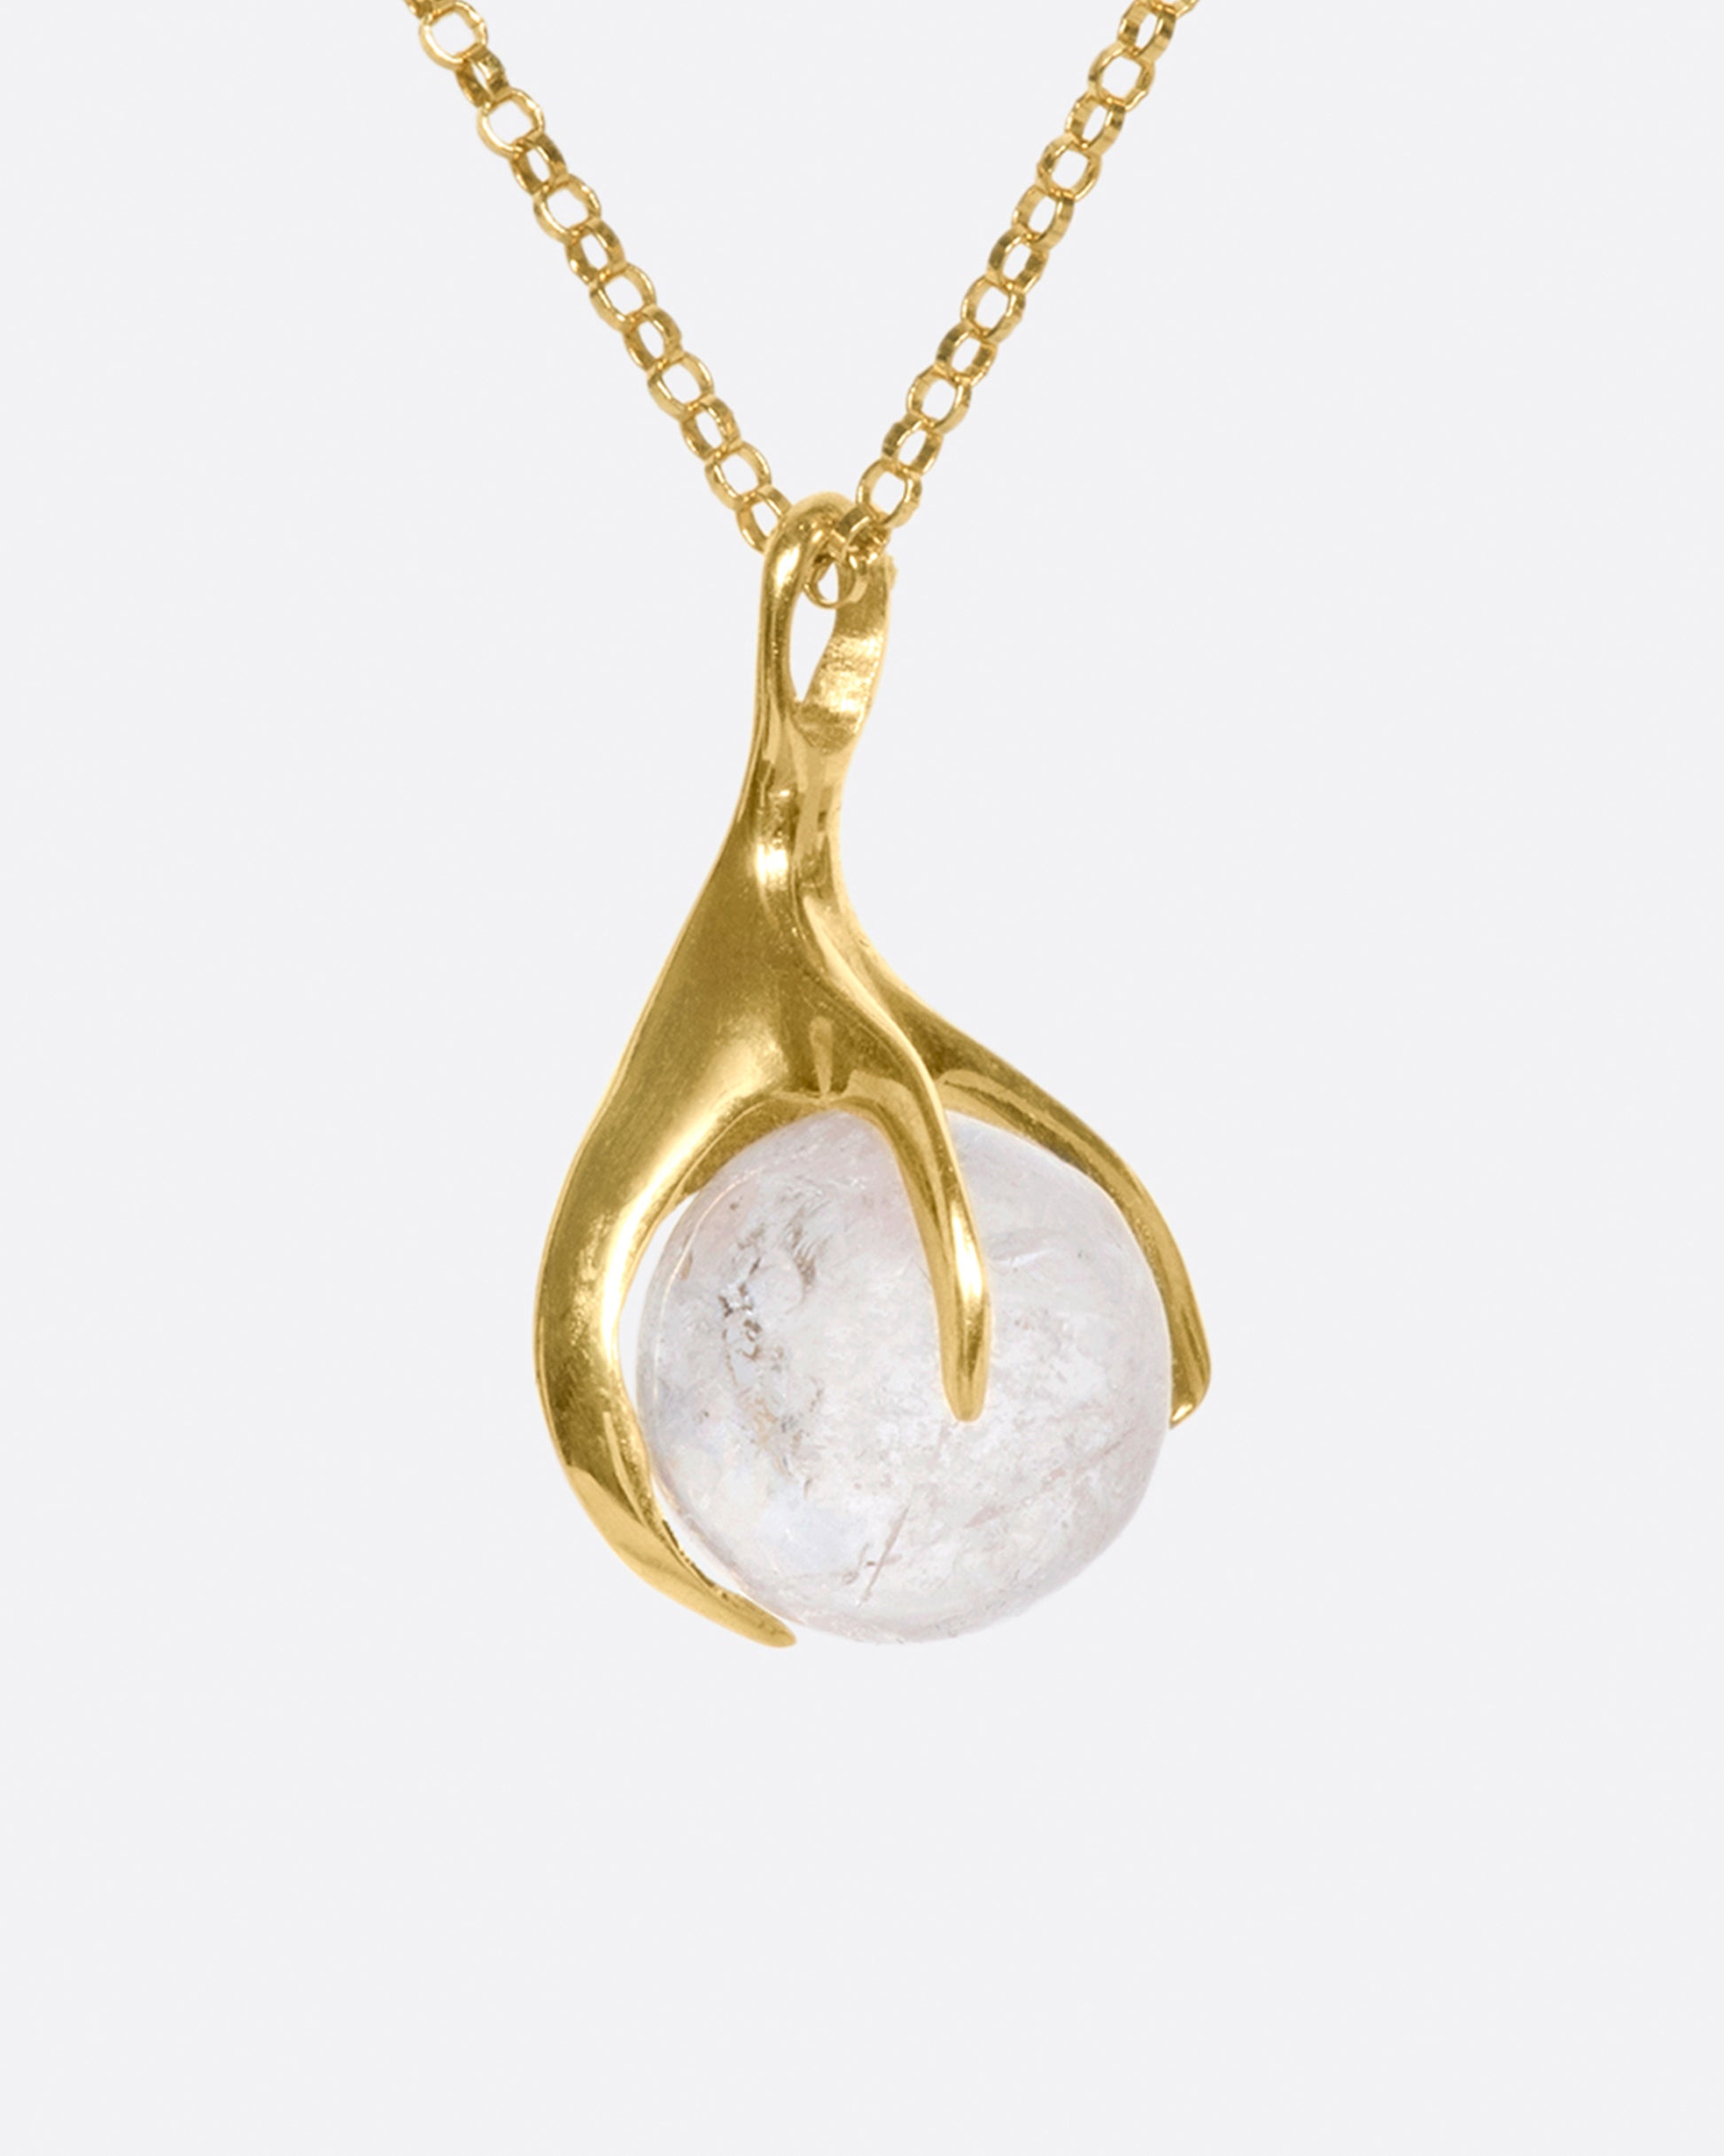 A pale pink tourmaline sphere is set in a gold claw setting for a substantial, yet airy pendant.